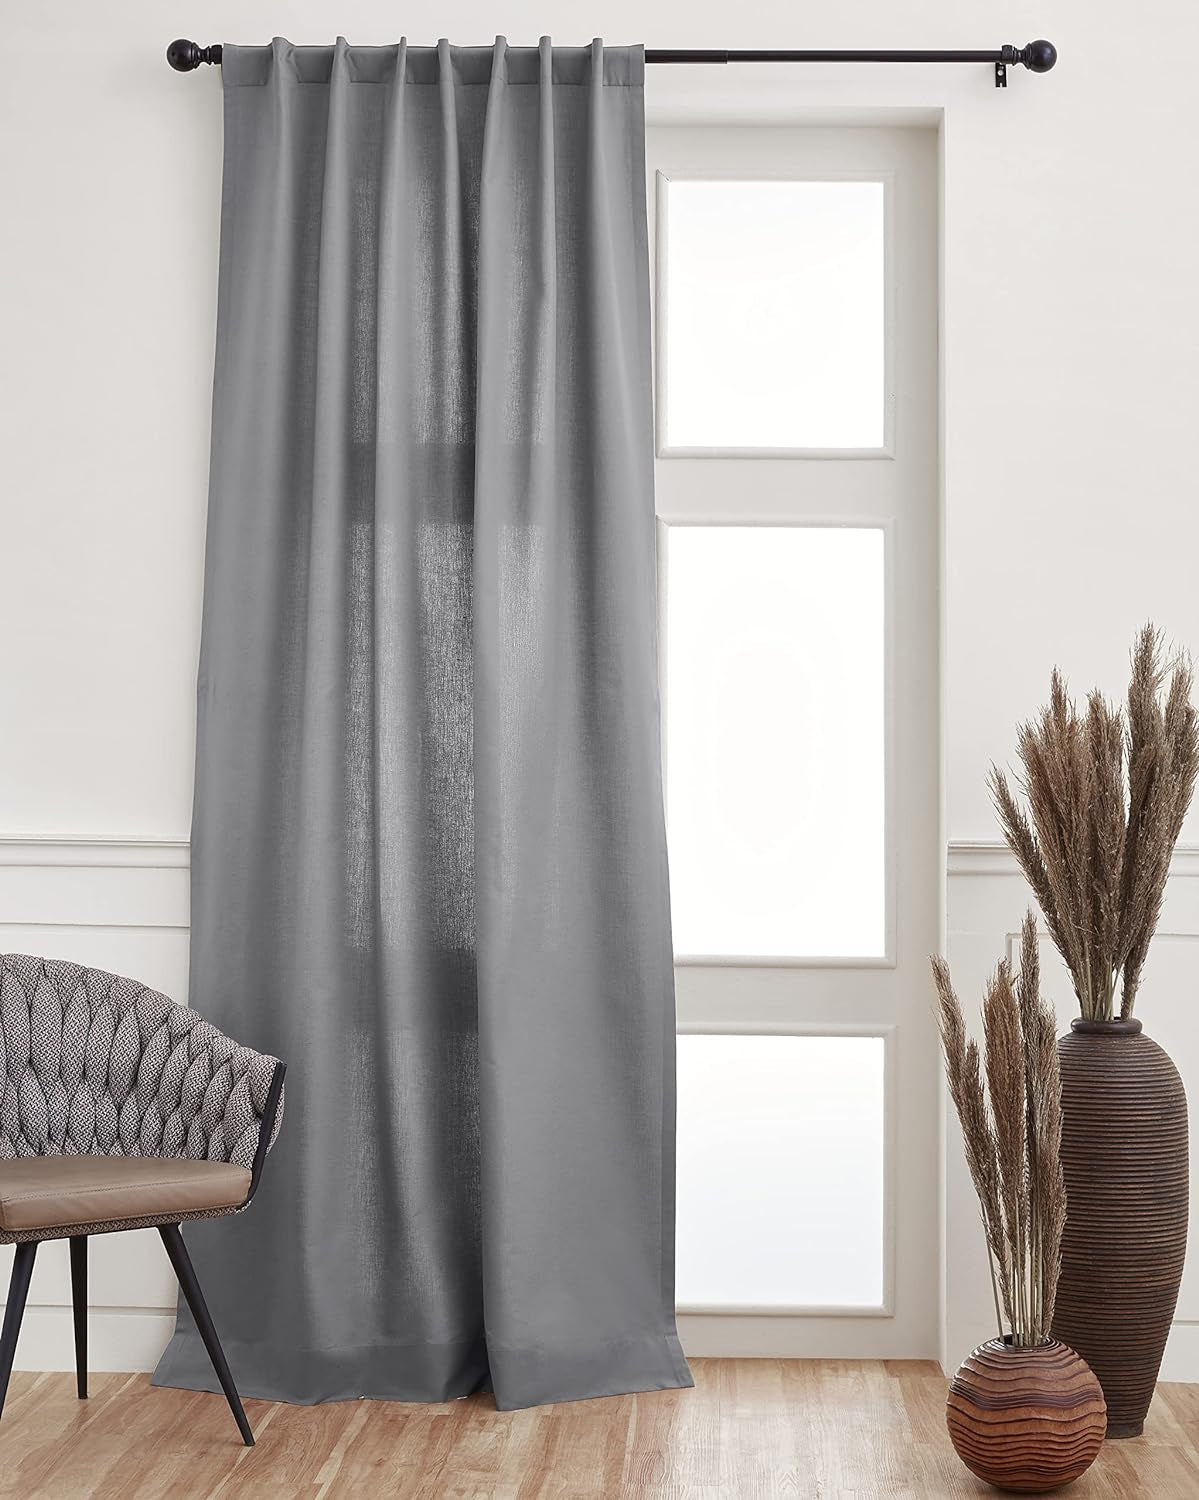 Solino Home Cotton Linen Curtain Ivory – 52 X 54 Inch Curtain with Rod Pocket and Hidden Tab – 2 in 1 Hanging Style Curtain for Living Room, Indoor, Outdoor  Solino Home Grey 52 X 120 Inch 